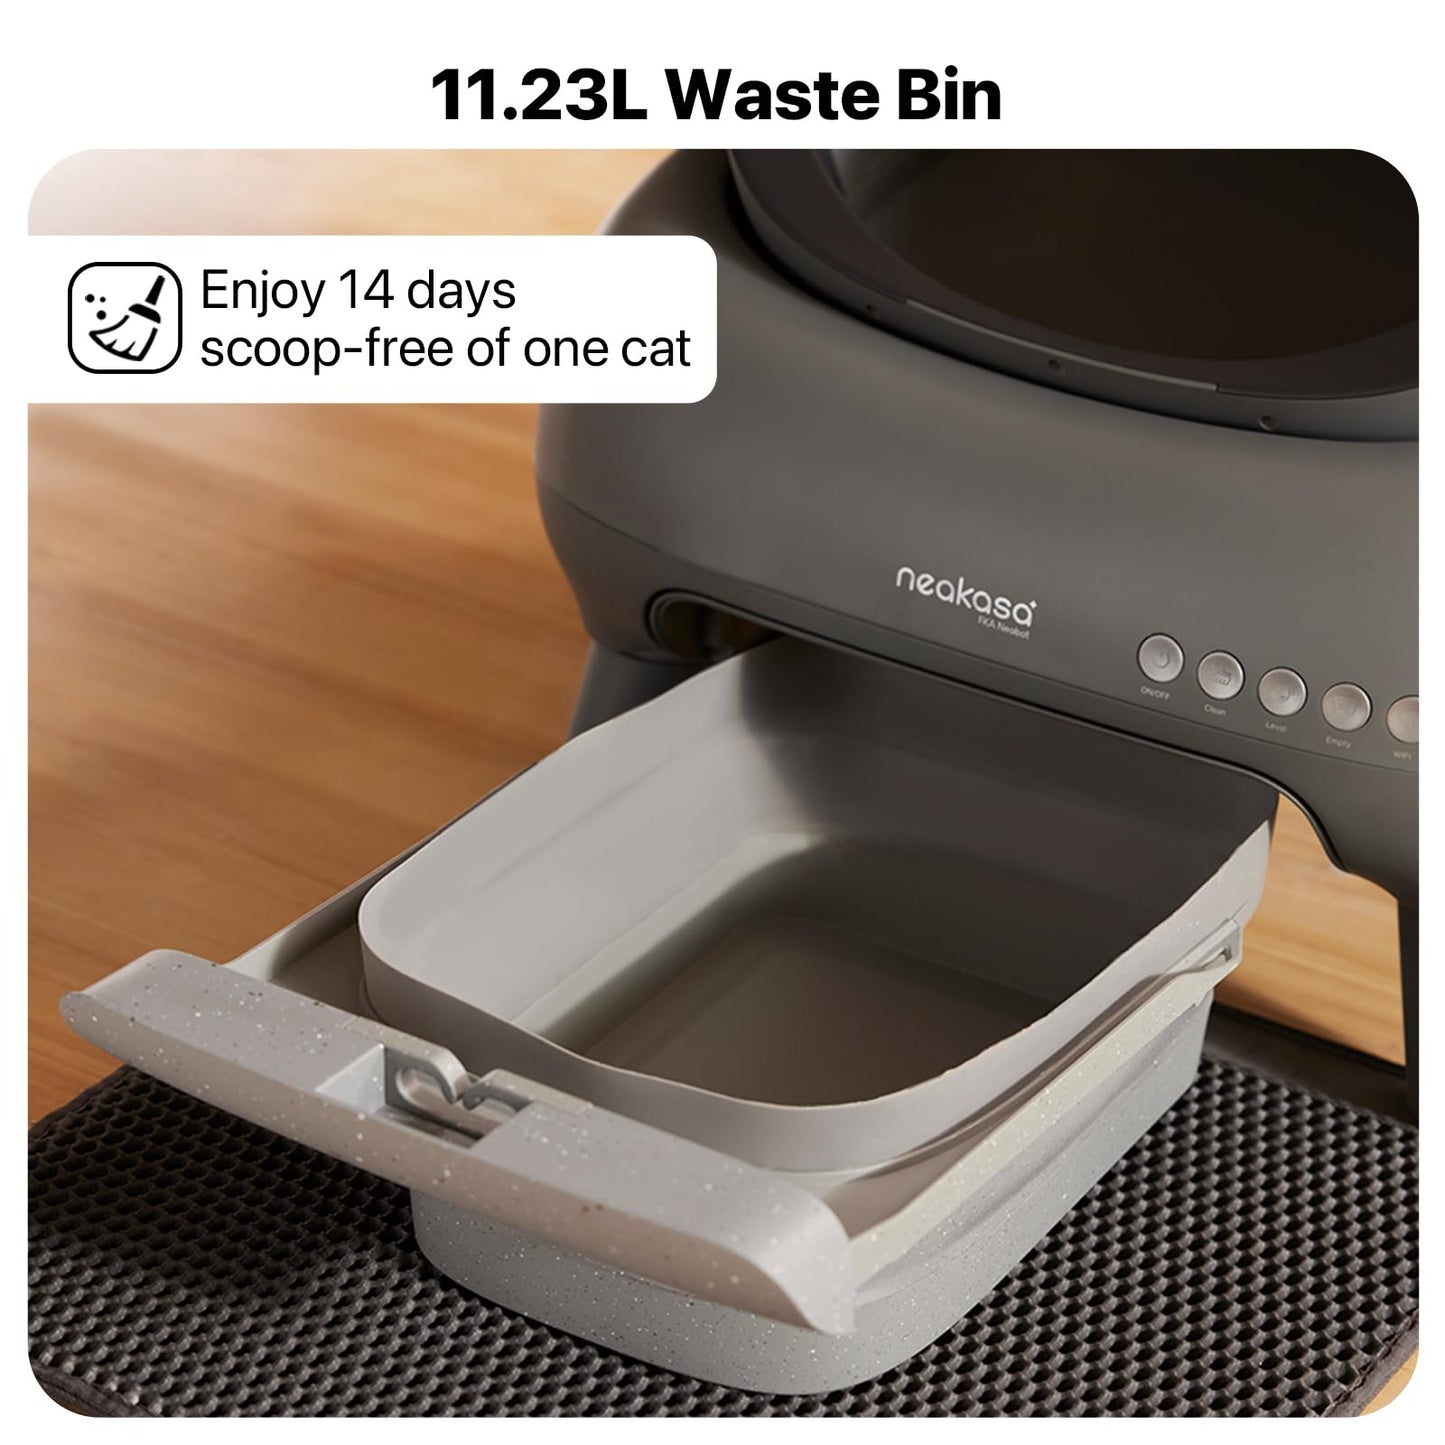 Neakasa M1 Open-Top Self Cleaning Cat Litter Box, Automatic Cat Litter Box with APP Control, Odor-Free Waste Disposal includes Trash Bags